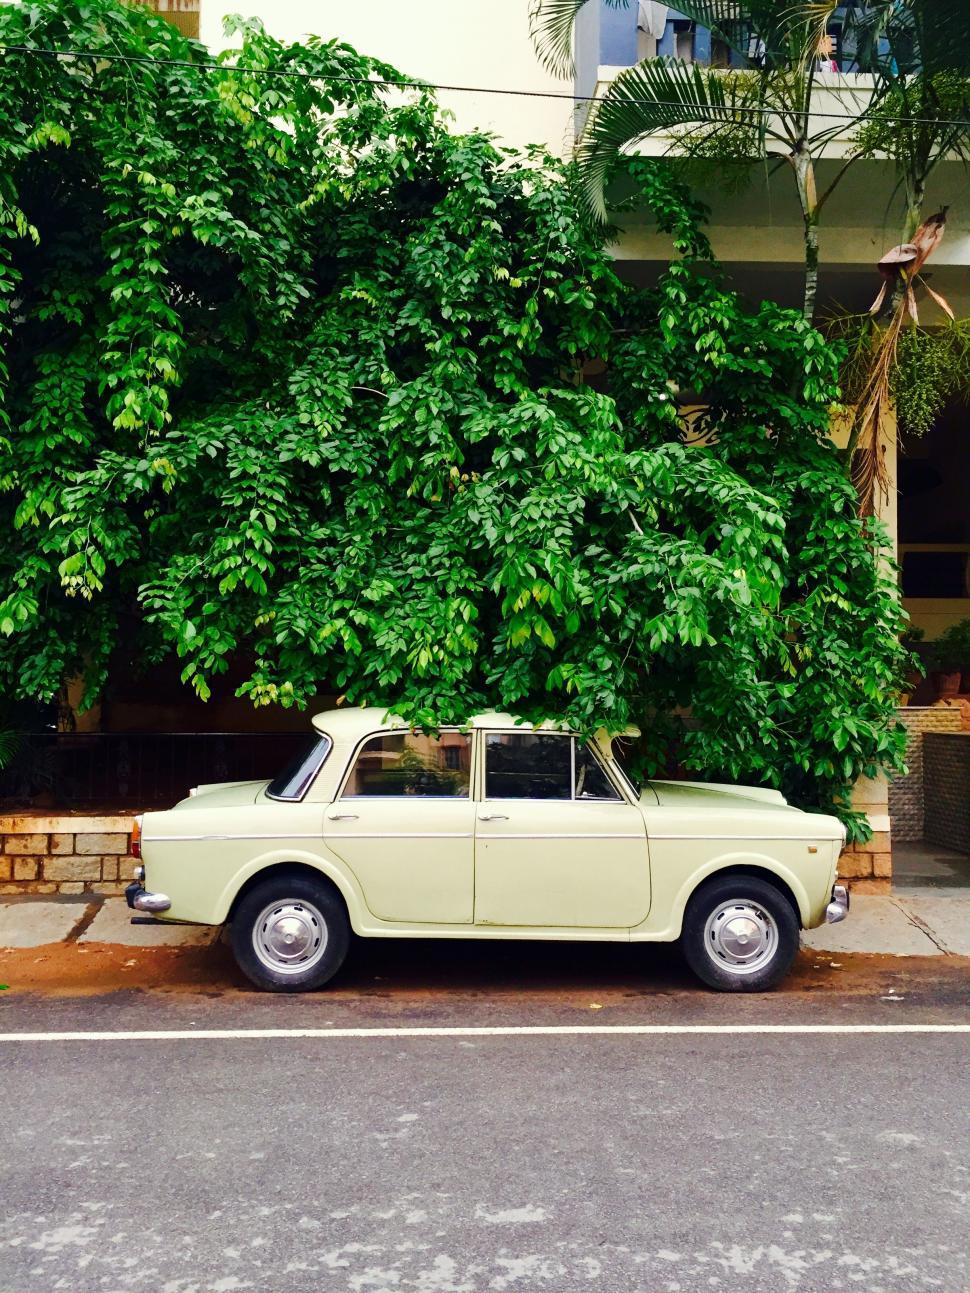 Free Image of Old Car Parked in Front of Tree 